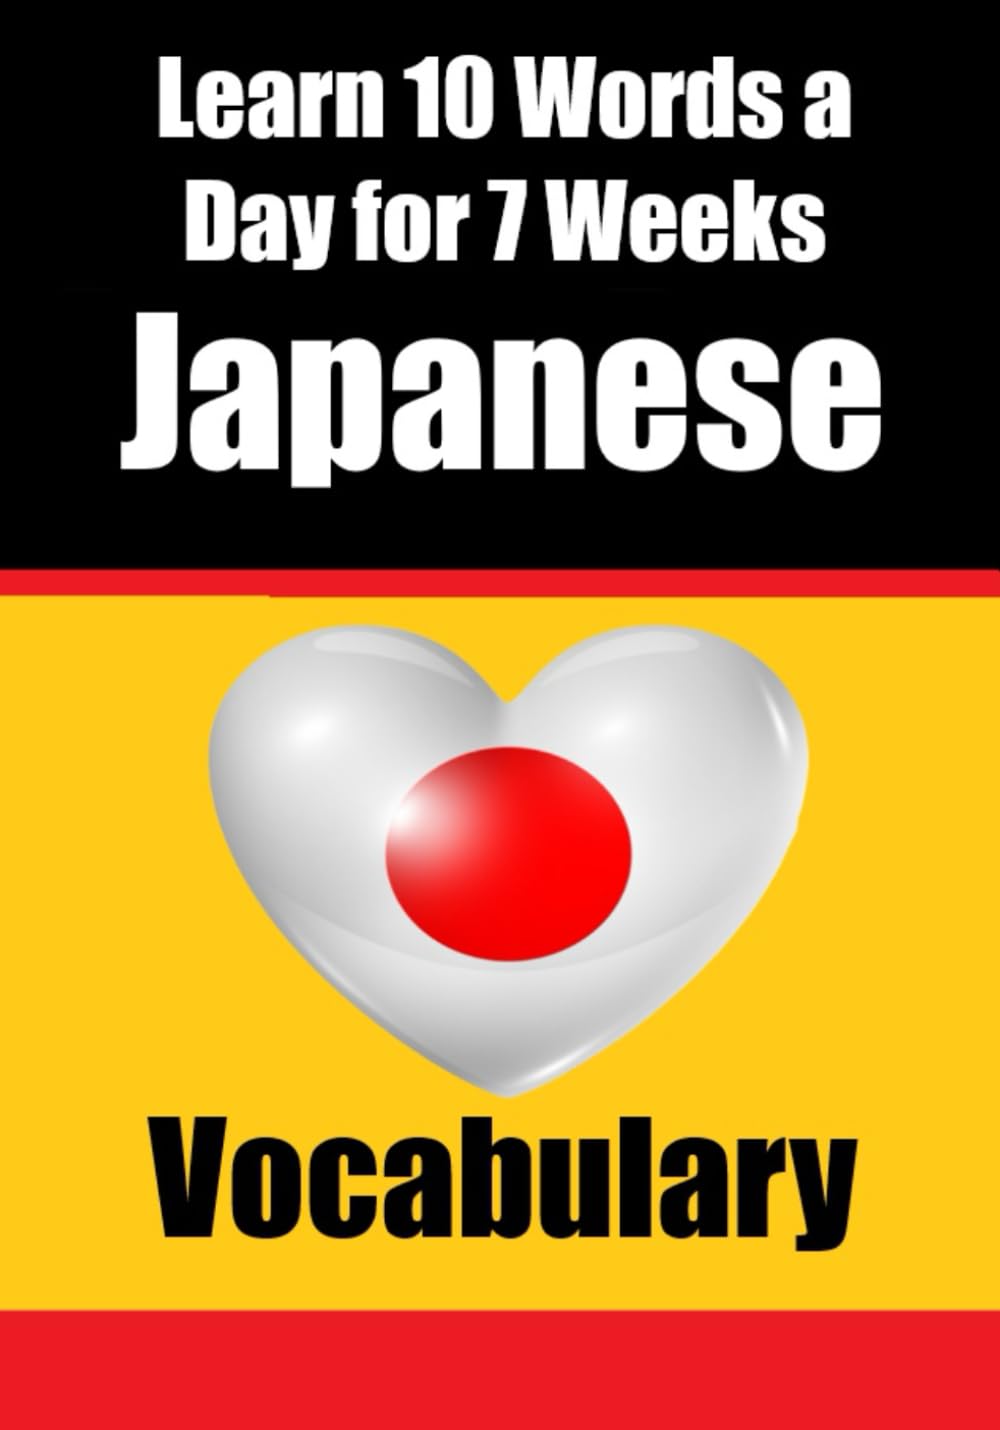 Learn 10 Japanese Words a Day for 7 Weeks